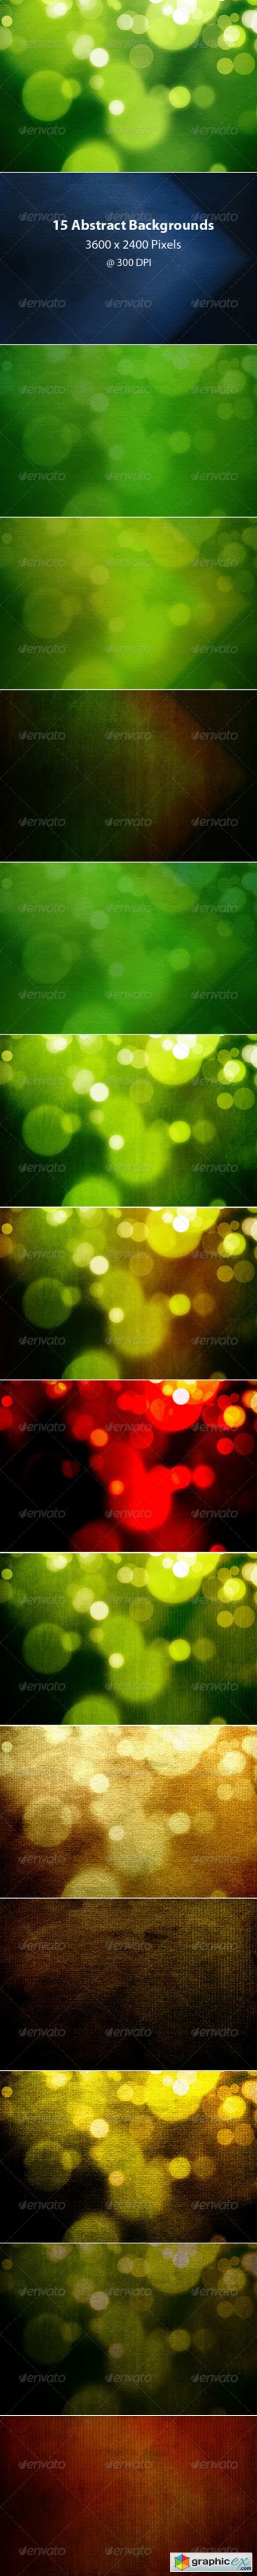 Abstract and Grunge Light Backgrounds